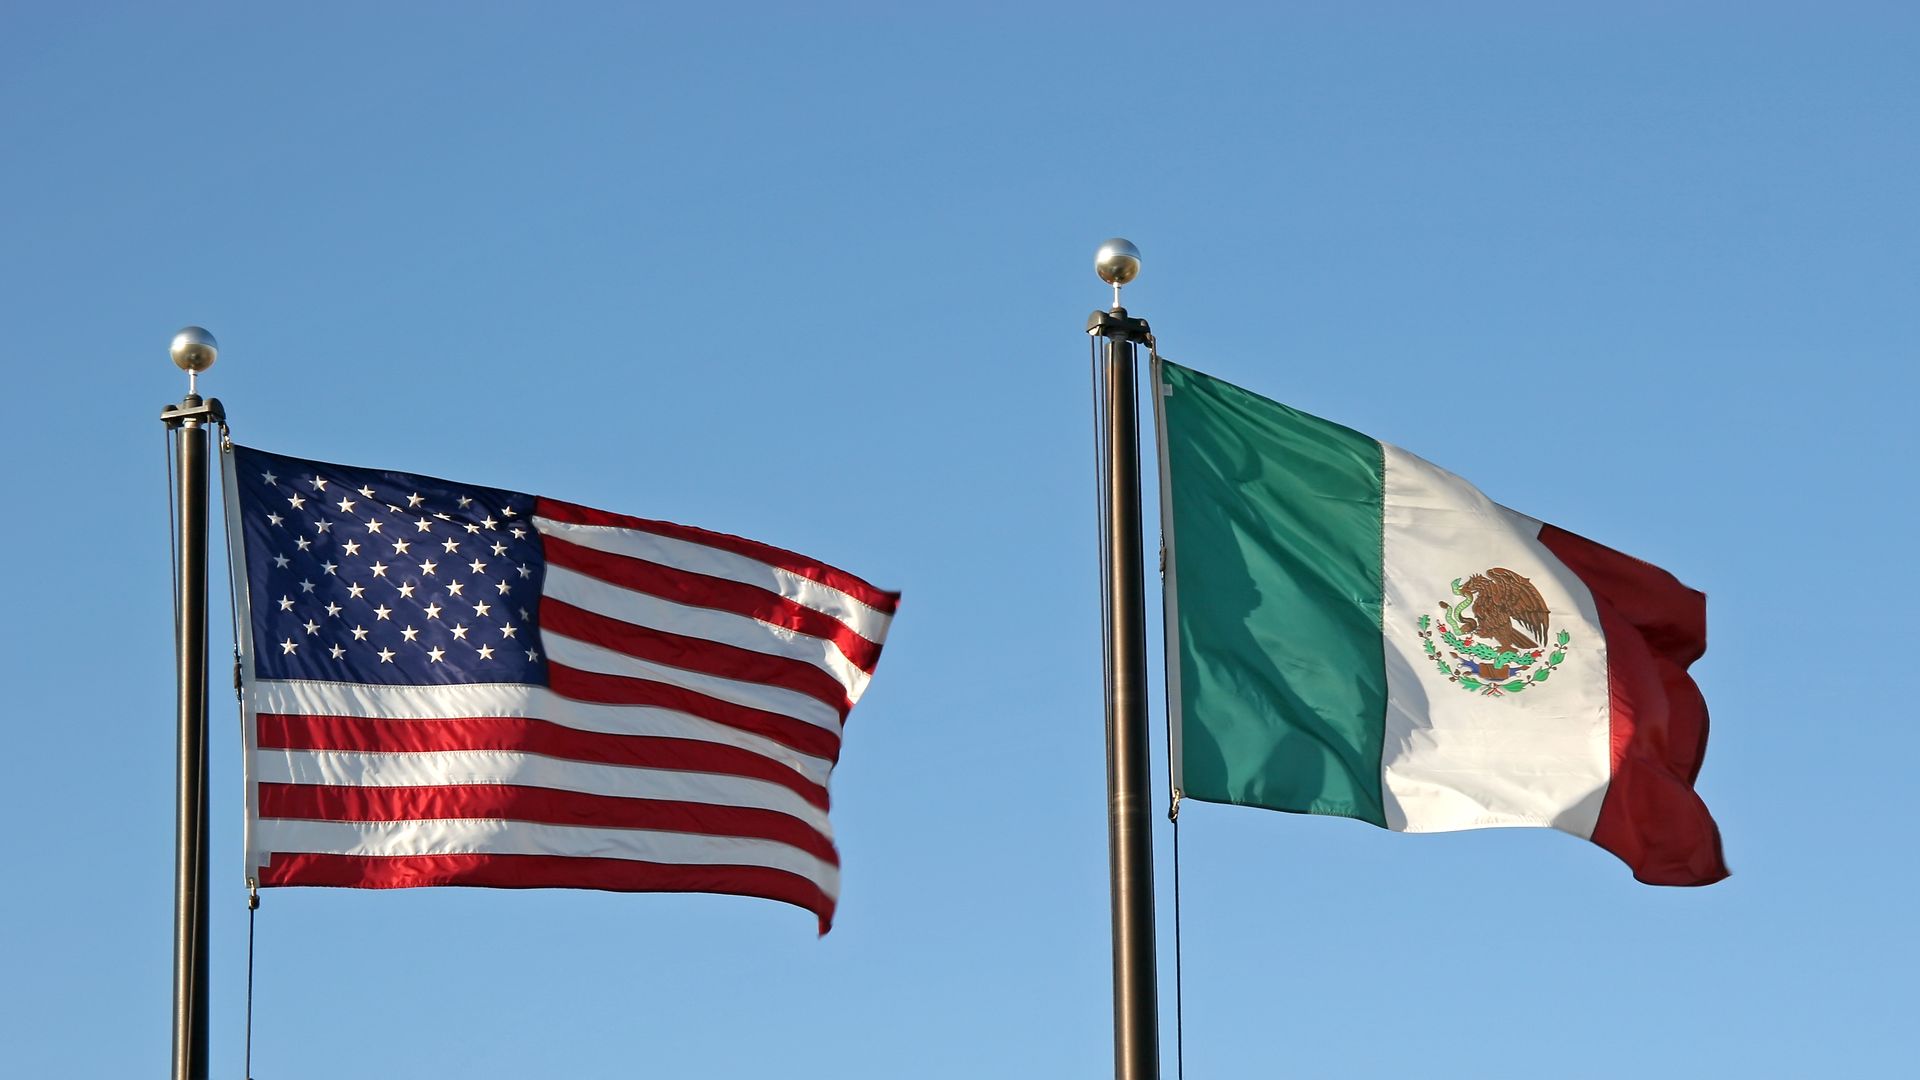 The American and Mexican flag side by side